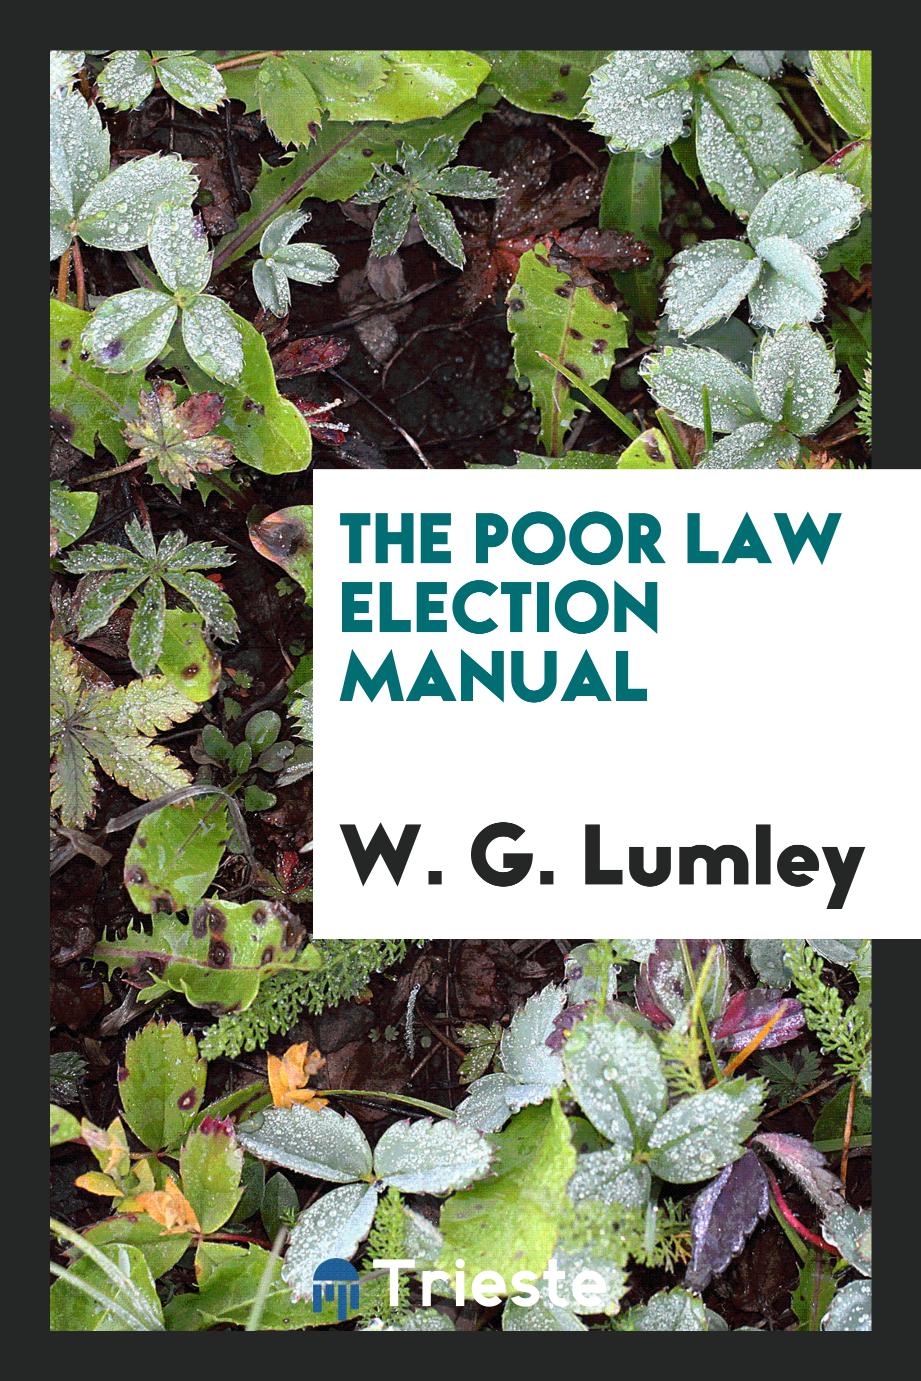 The Poor Law Election Manual